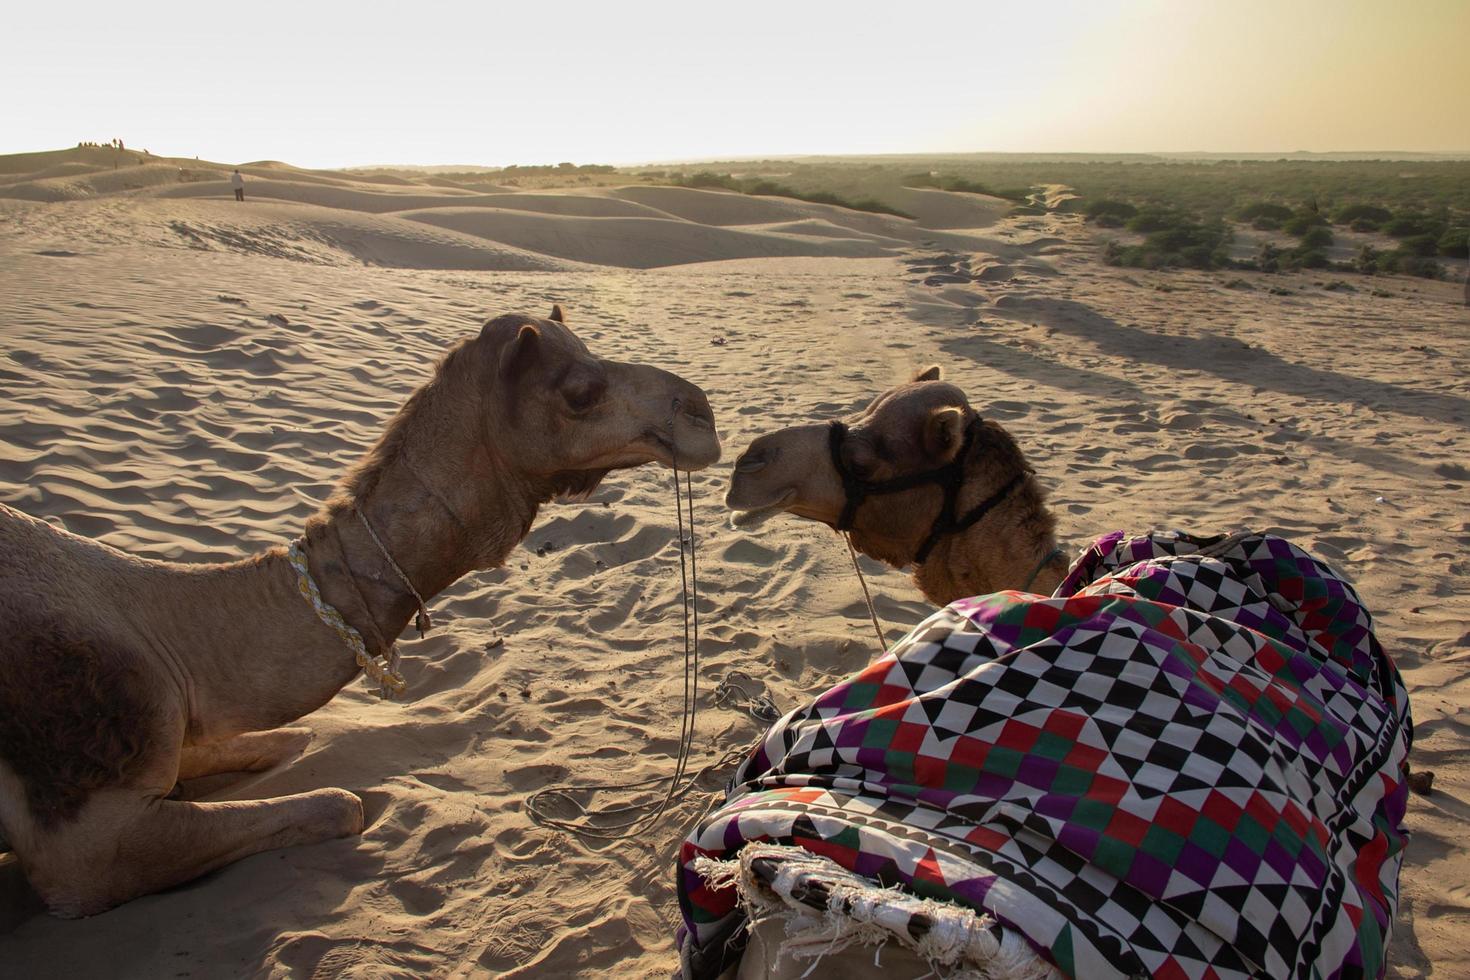 Two camel in love on the sand dune photo